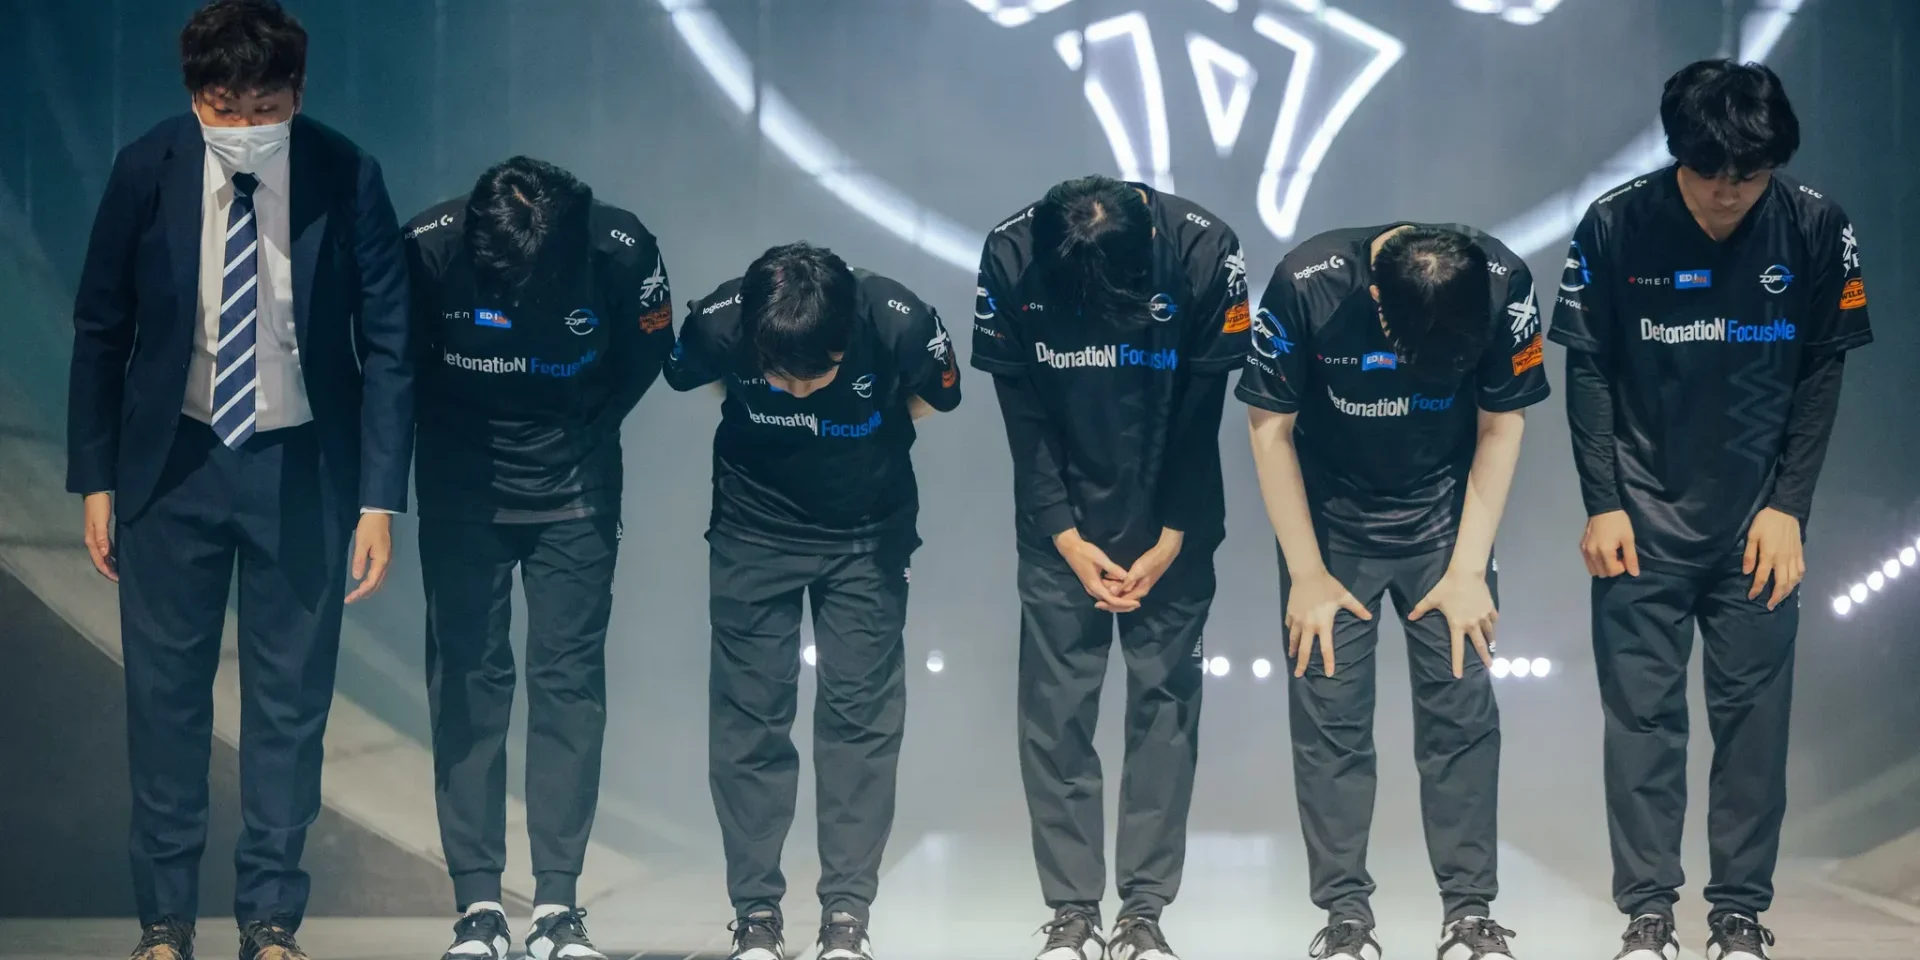 Riot suspends former DFM LoL coaches, fines org after harassment investigations